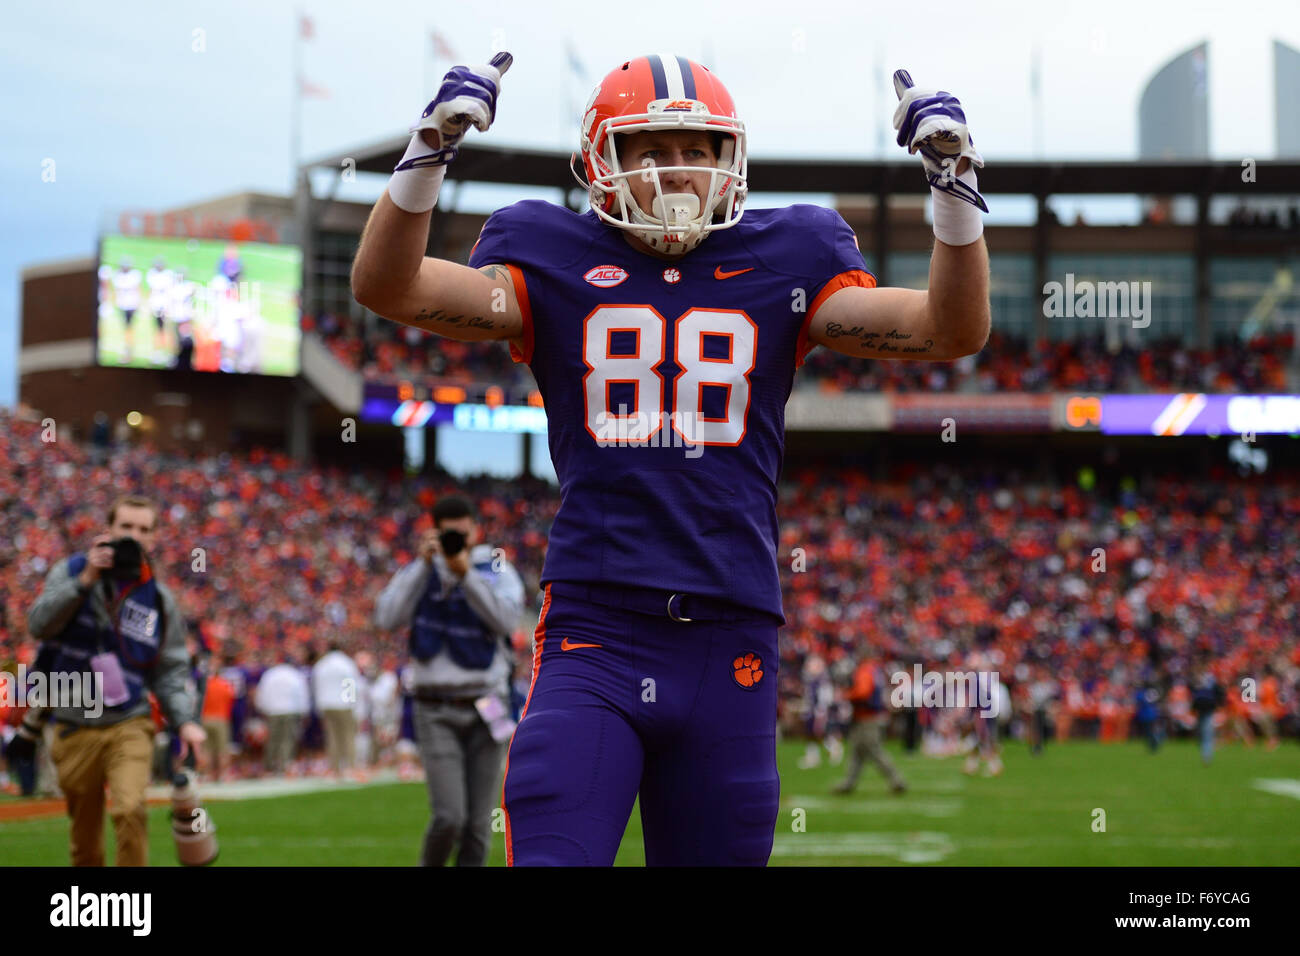 Clemson wide receiver Sean Mac Lain (88) just before the NCAA college football game between Wake Forest and Clemson on Saturday Nov. 21, 2015 at Memorial Stadium, in Clemson, S.C. Jacob Kupferman/CSM Stock Photo